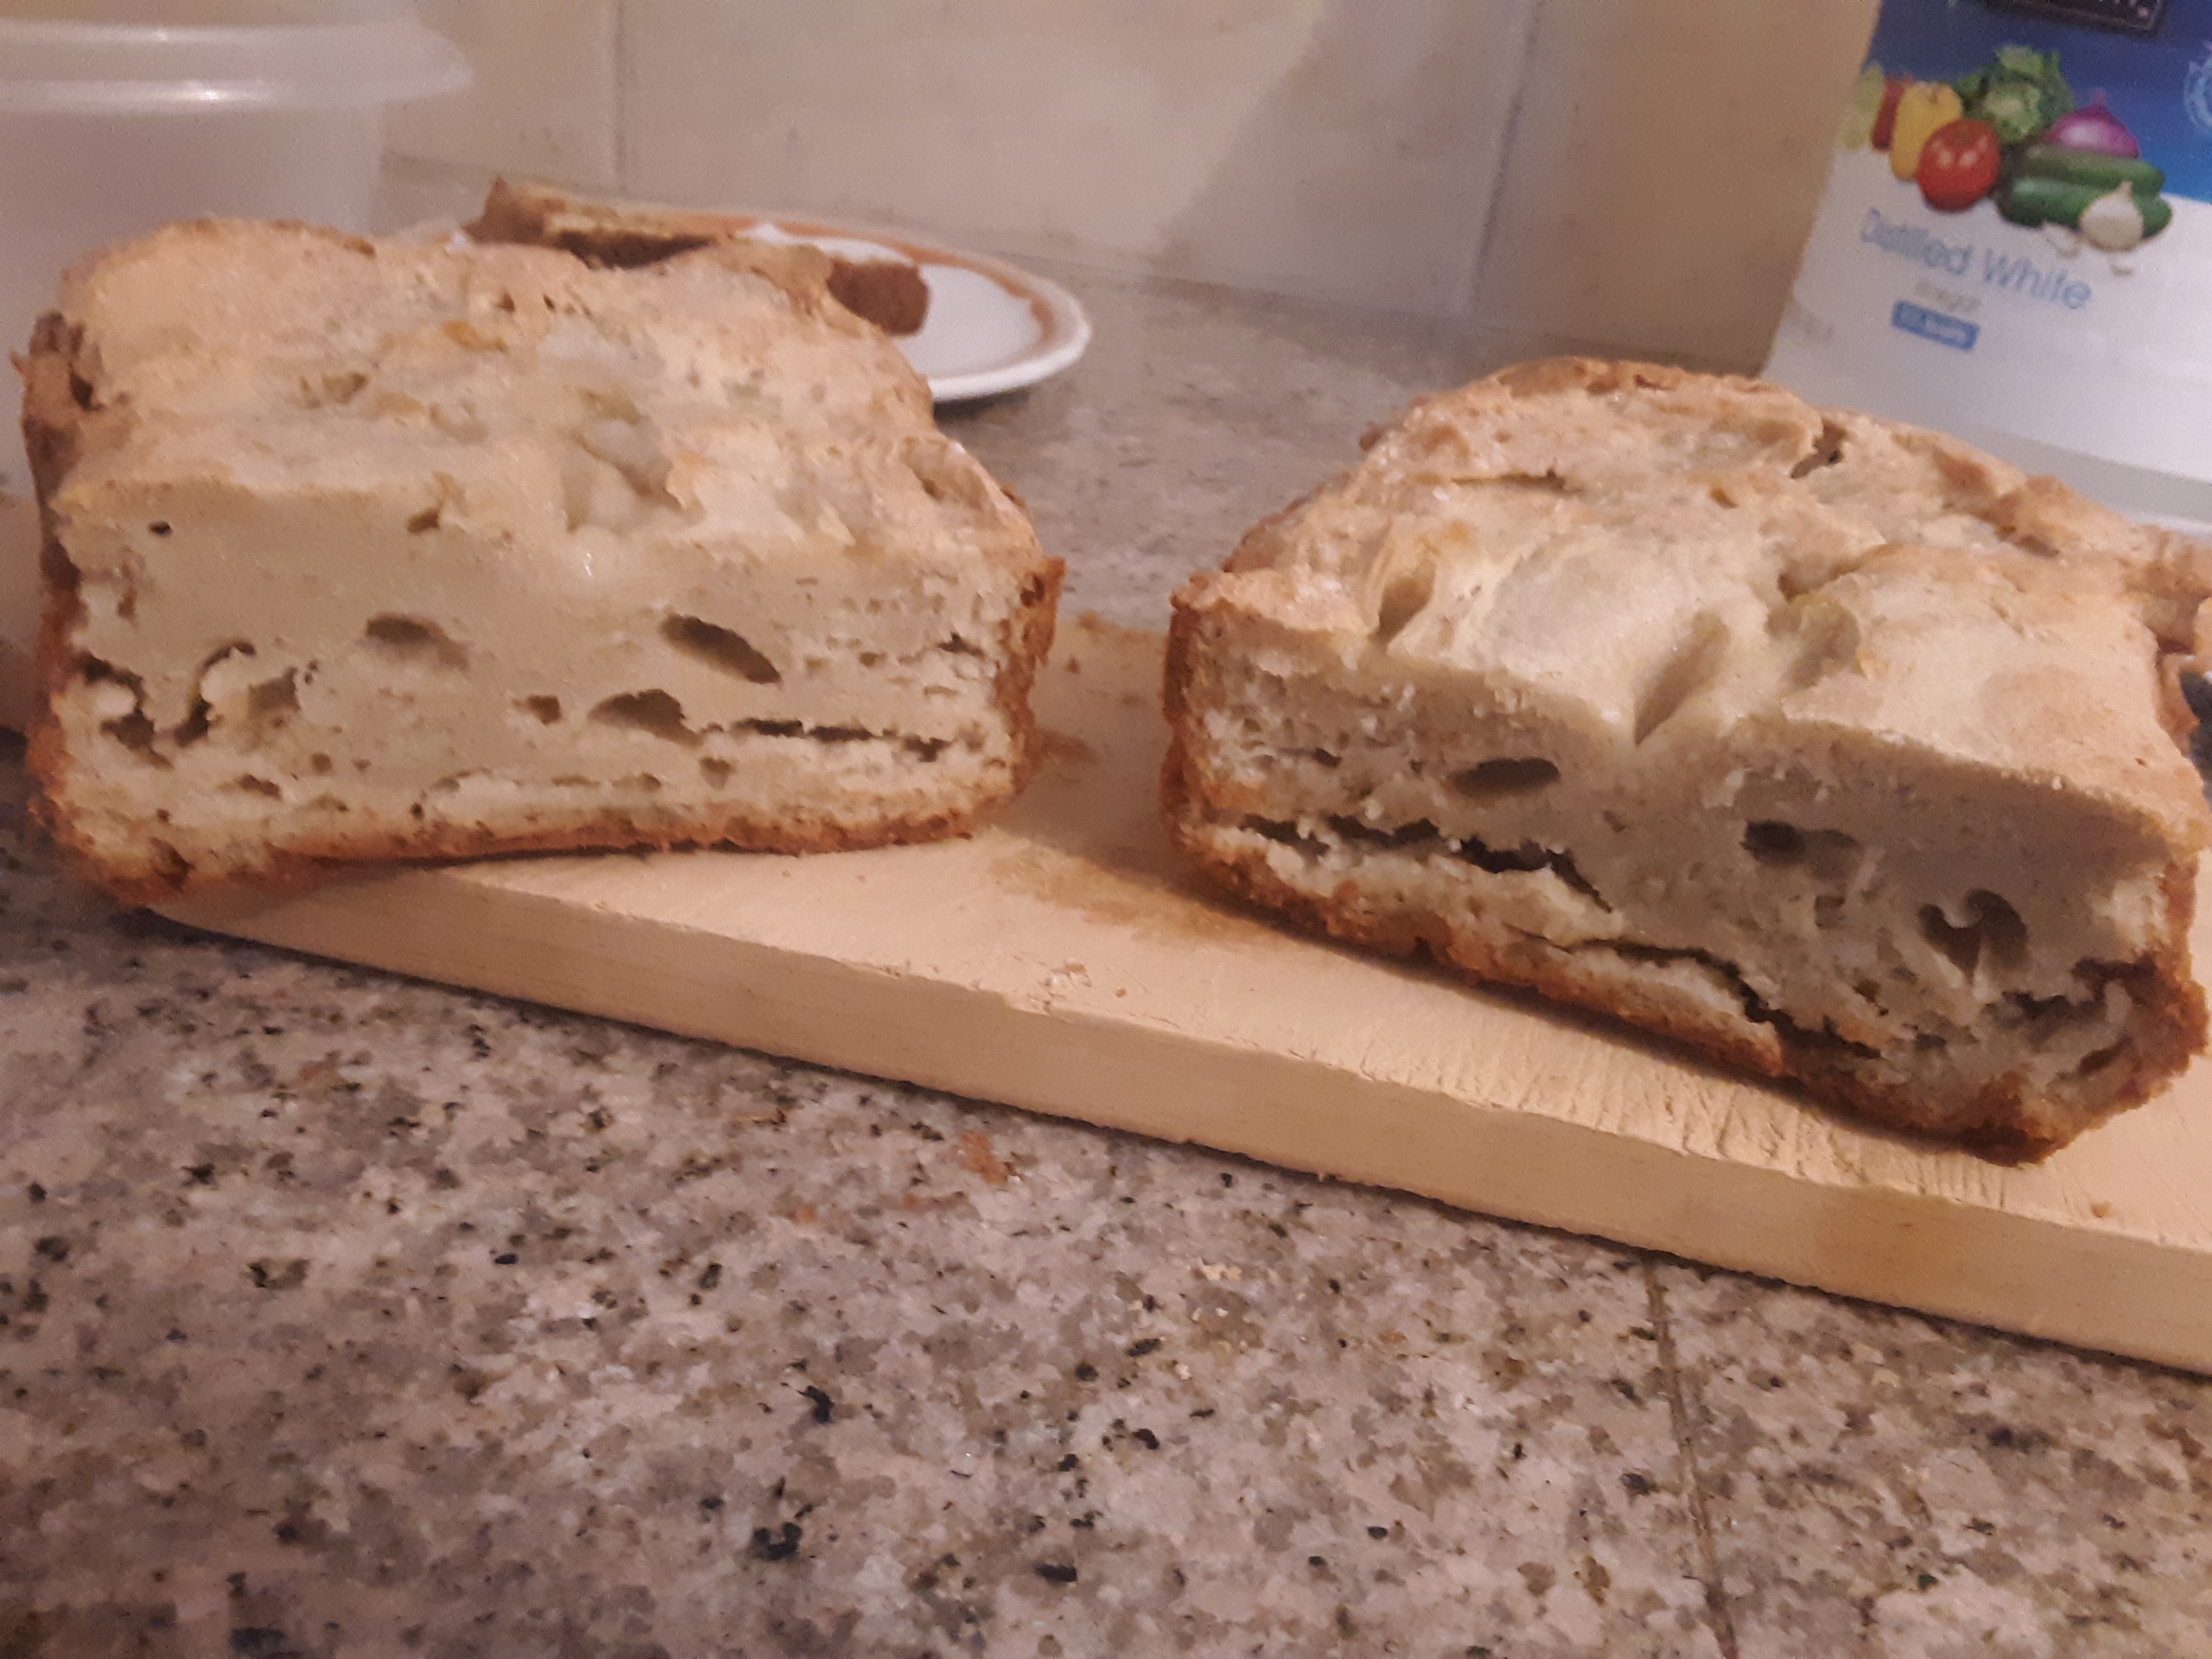 Living well in the 21st century - Limassol, Cyprus - a picture of the gluten free bread cut in half, air bubbles in the middle when cut in half. 